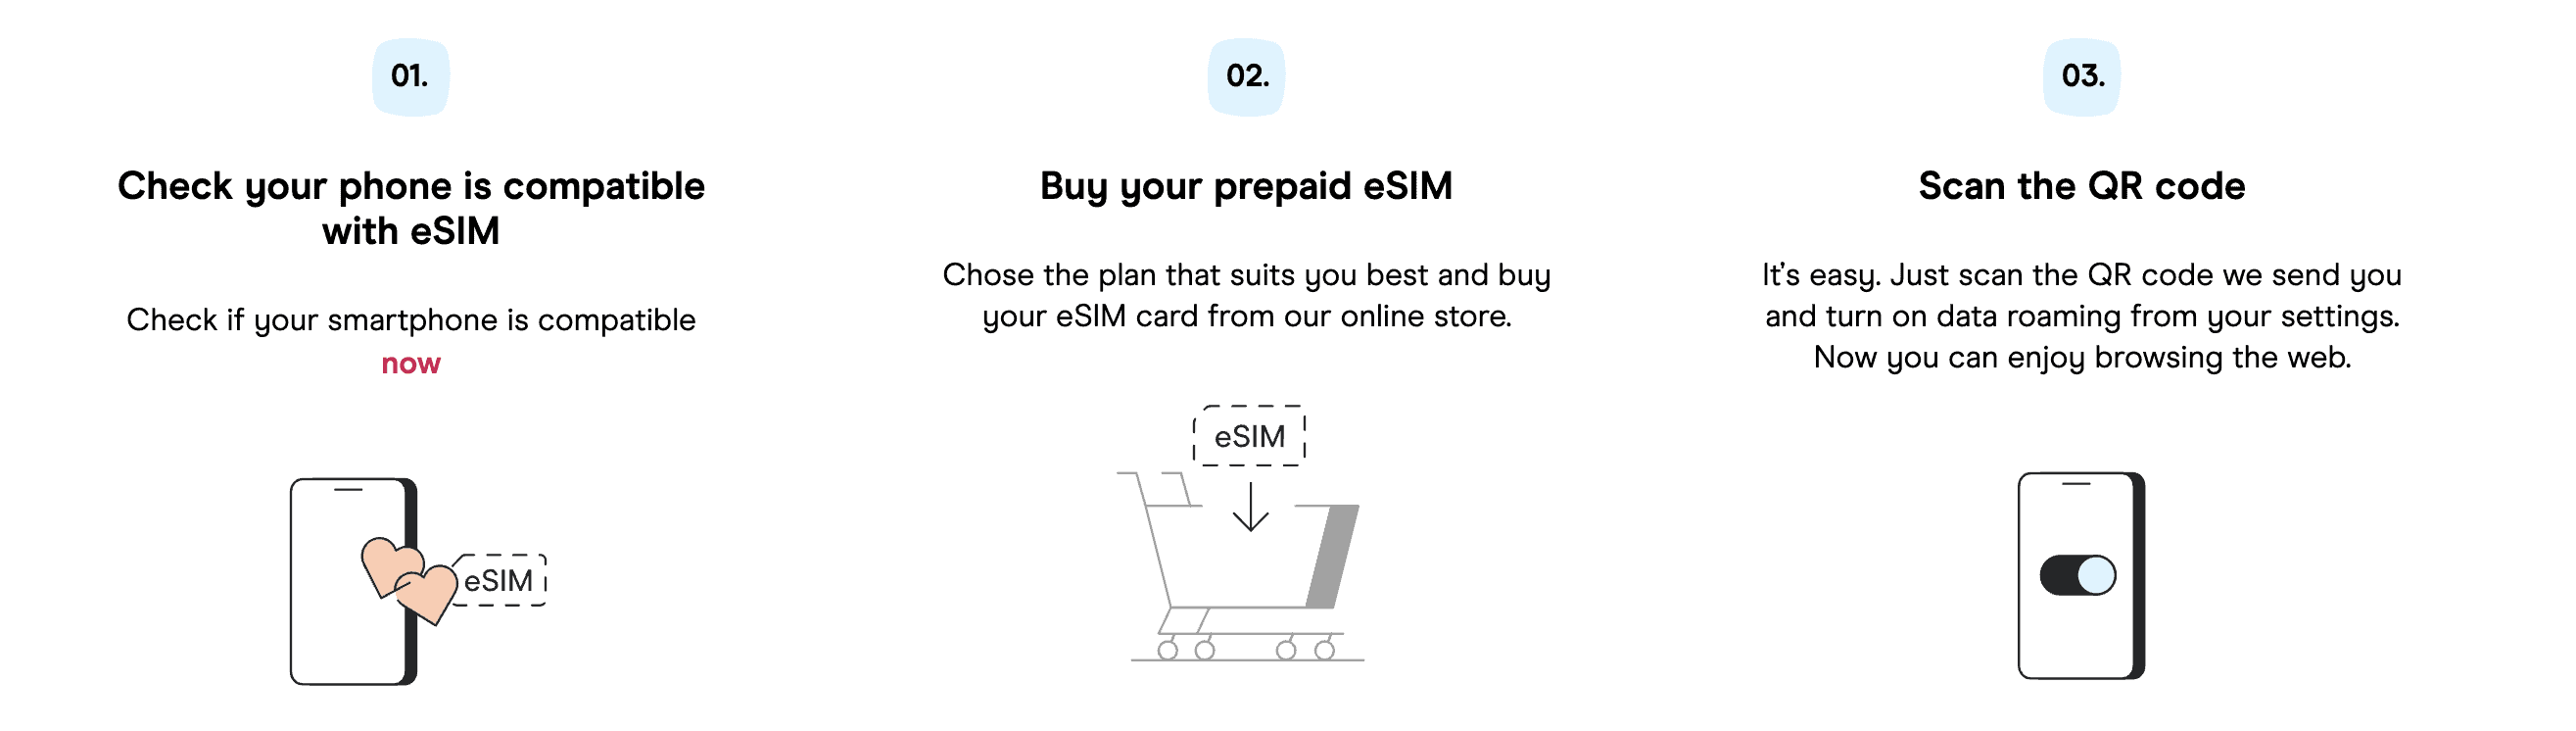 A screenshot from the Holafly eSIM website